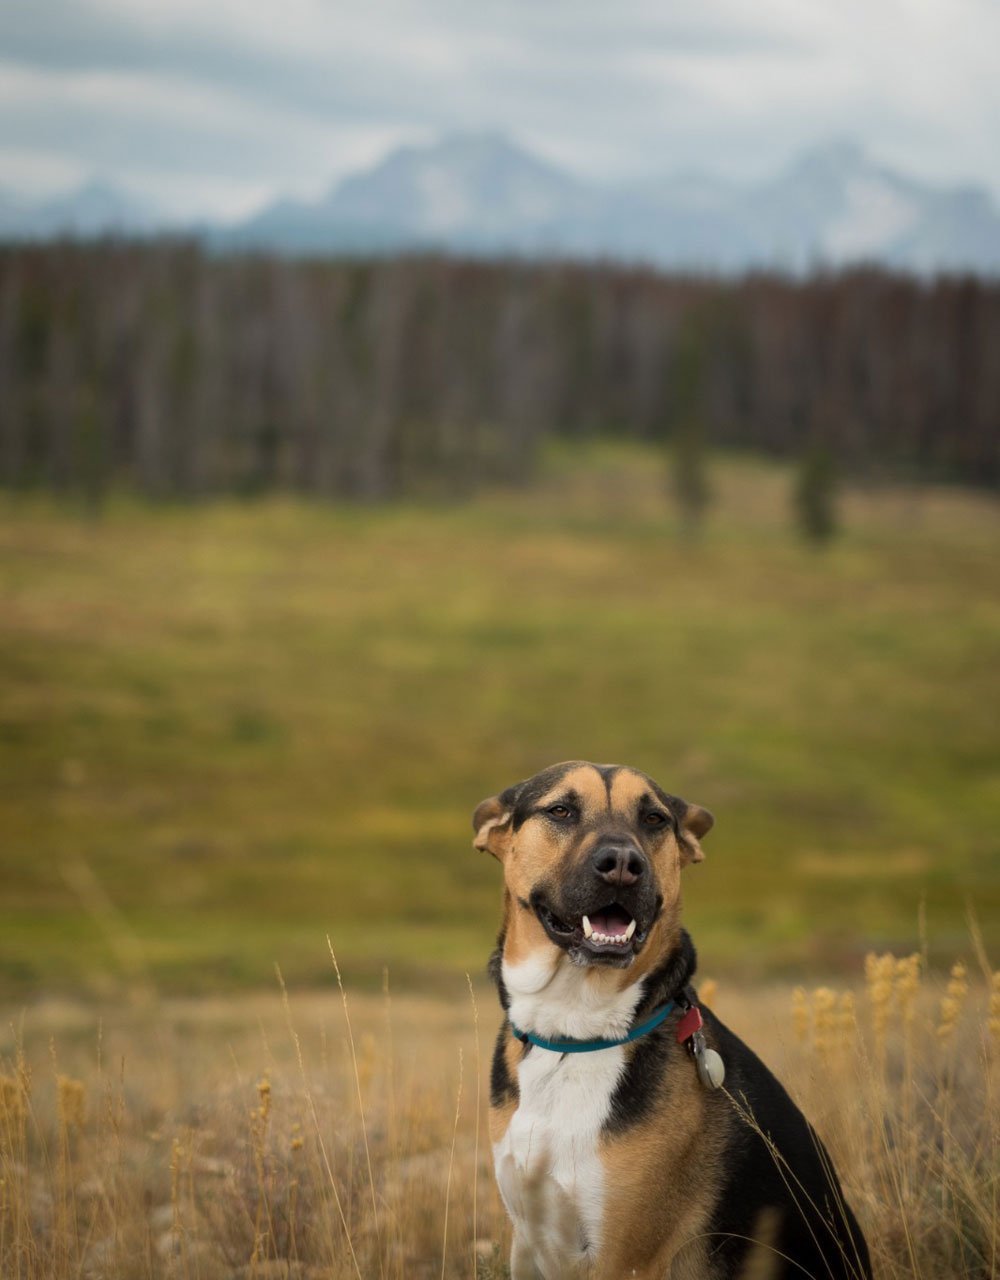 My best bud loving life in the Sawtooth Wilderness